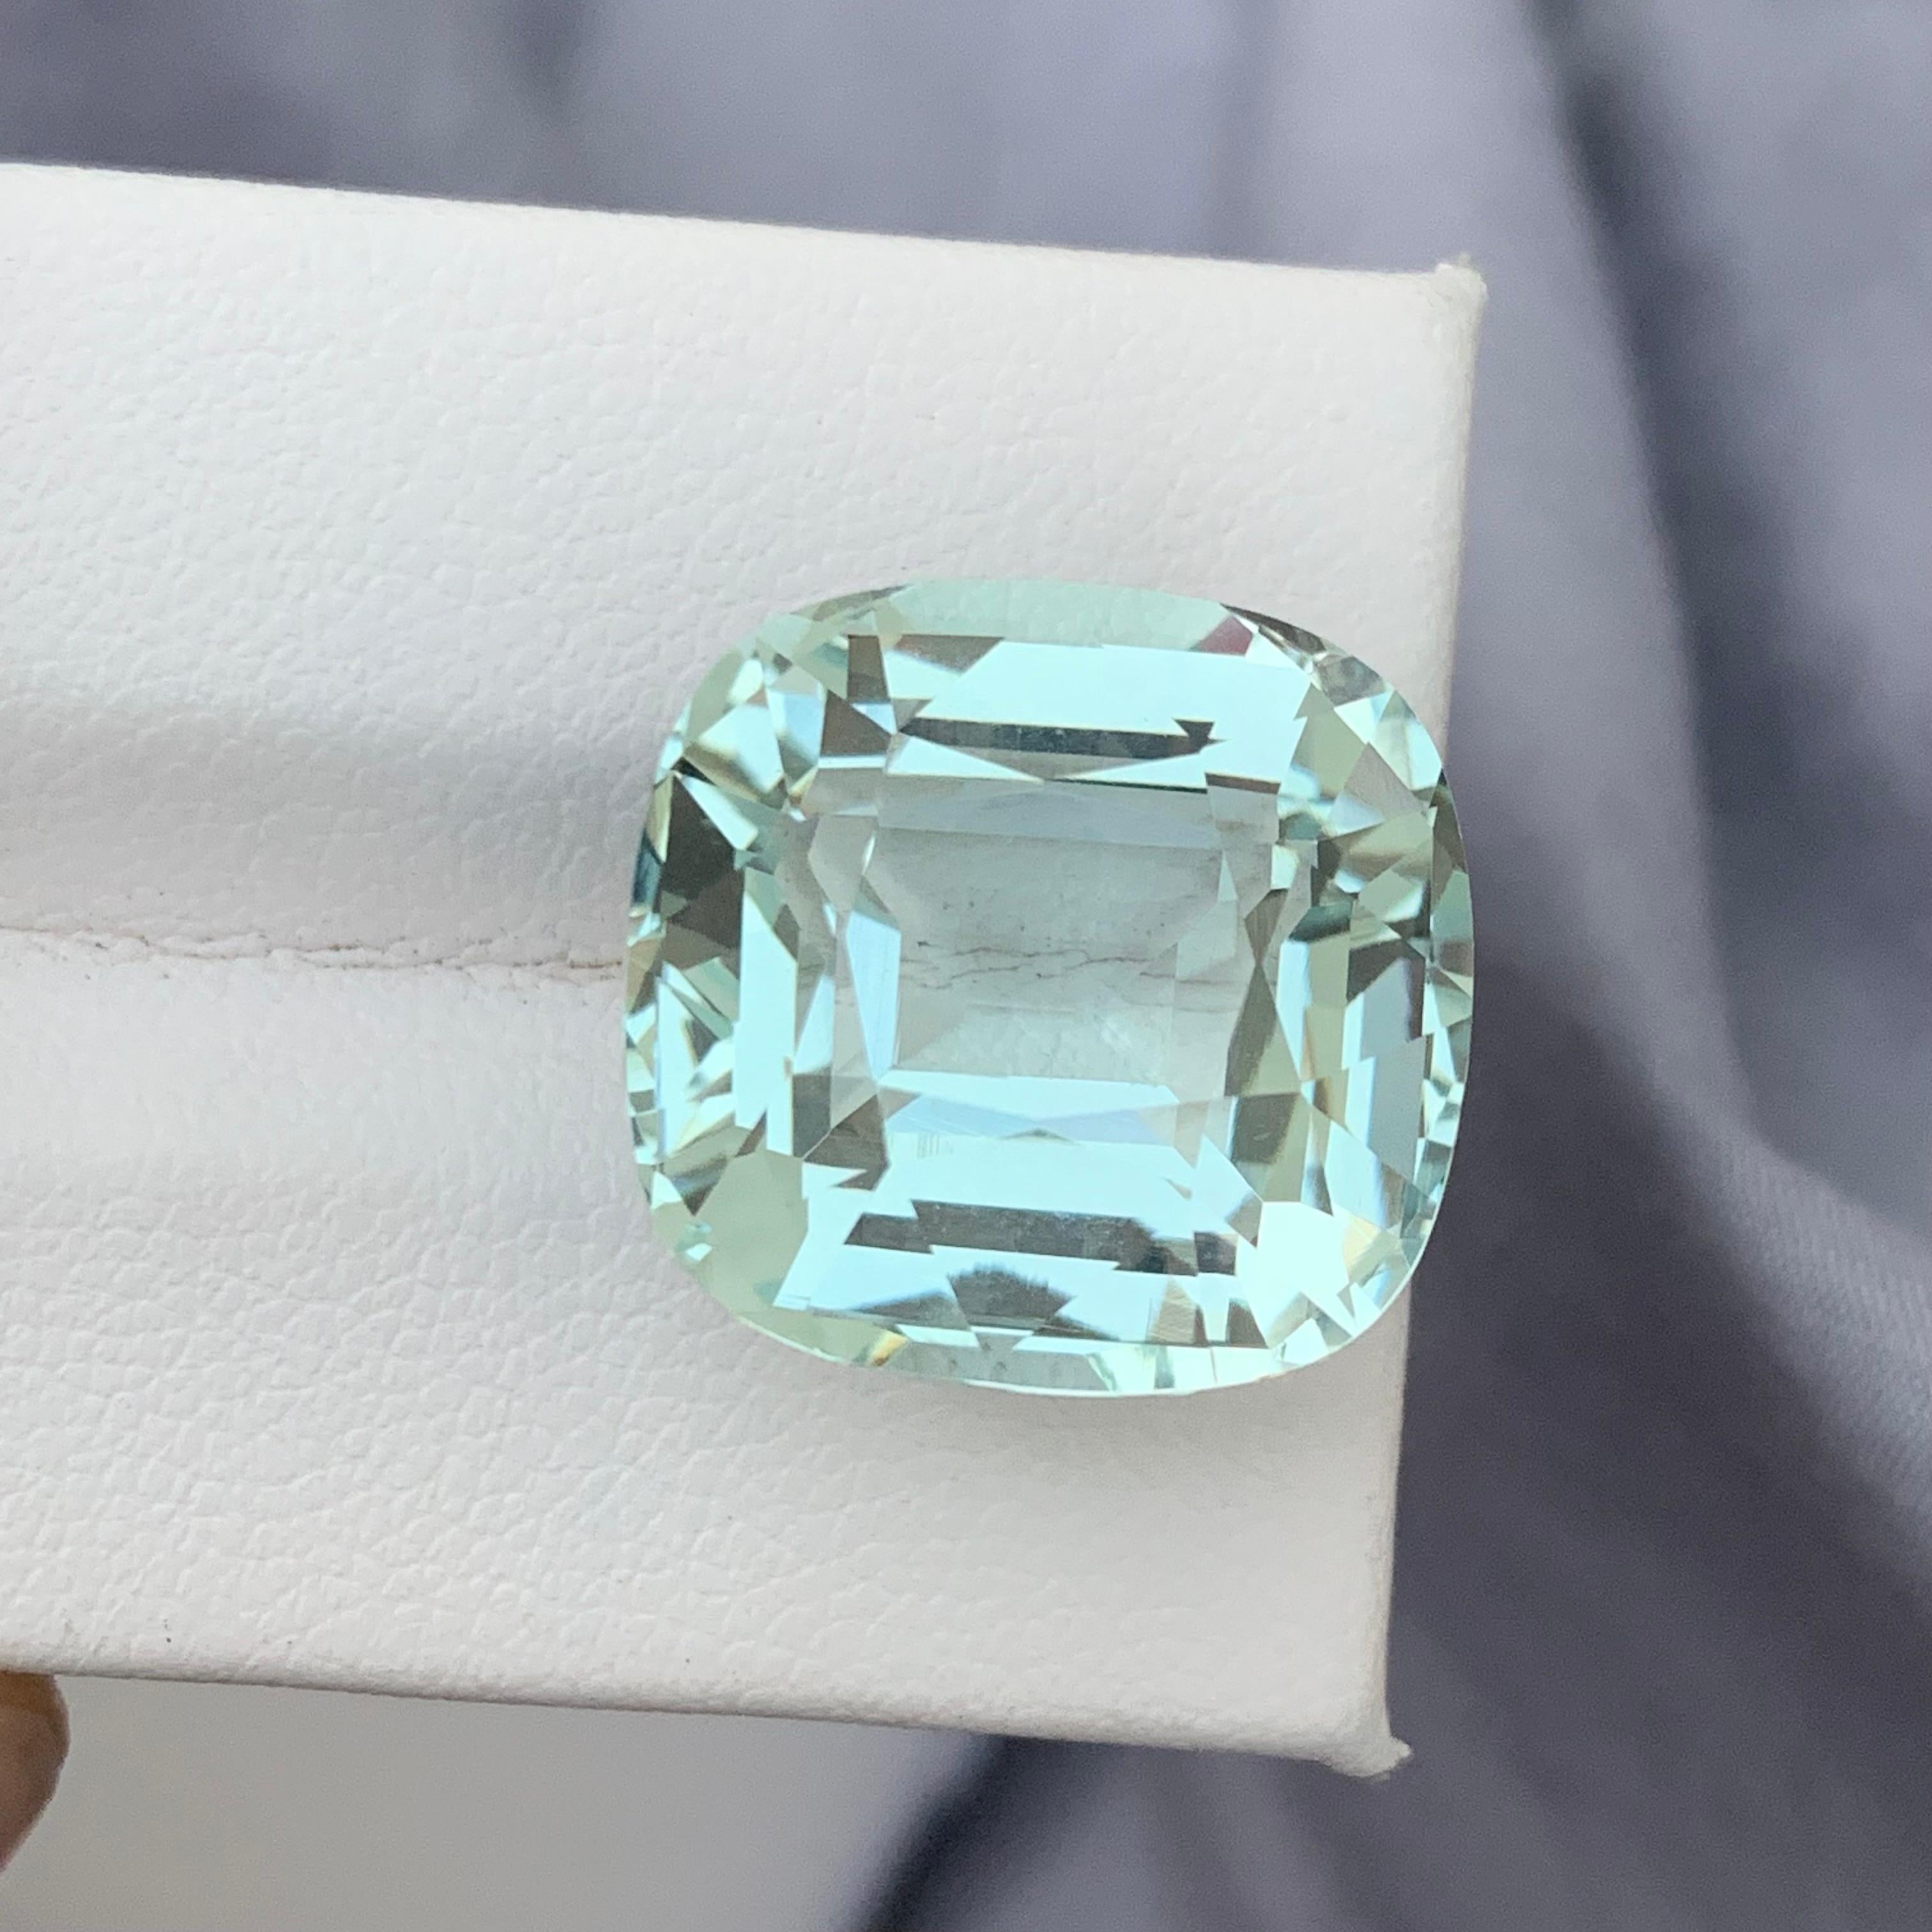 Loose Aquamarine 
Weight: 22.95 Carats 
Dimension: 18x17.4x11.8 Mm
Origin: Madagascar Africa 
Shape: Cushion
Color: Light Green
Treatment: Non
Certificate: On Customer Demand 
Green aquamarine, often referred to as 